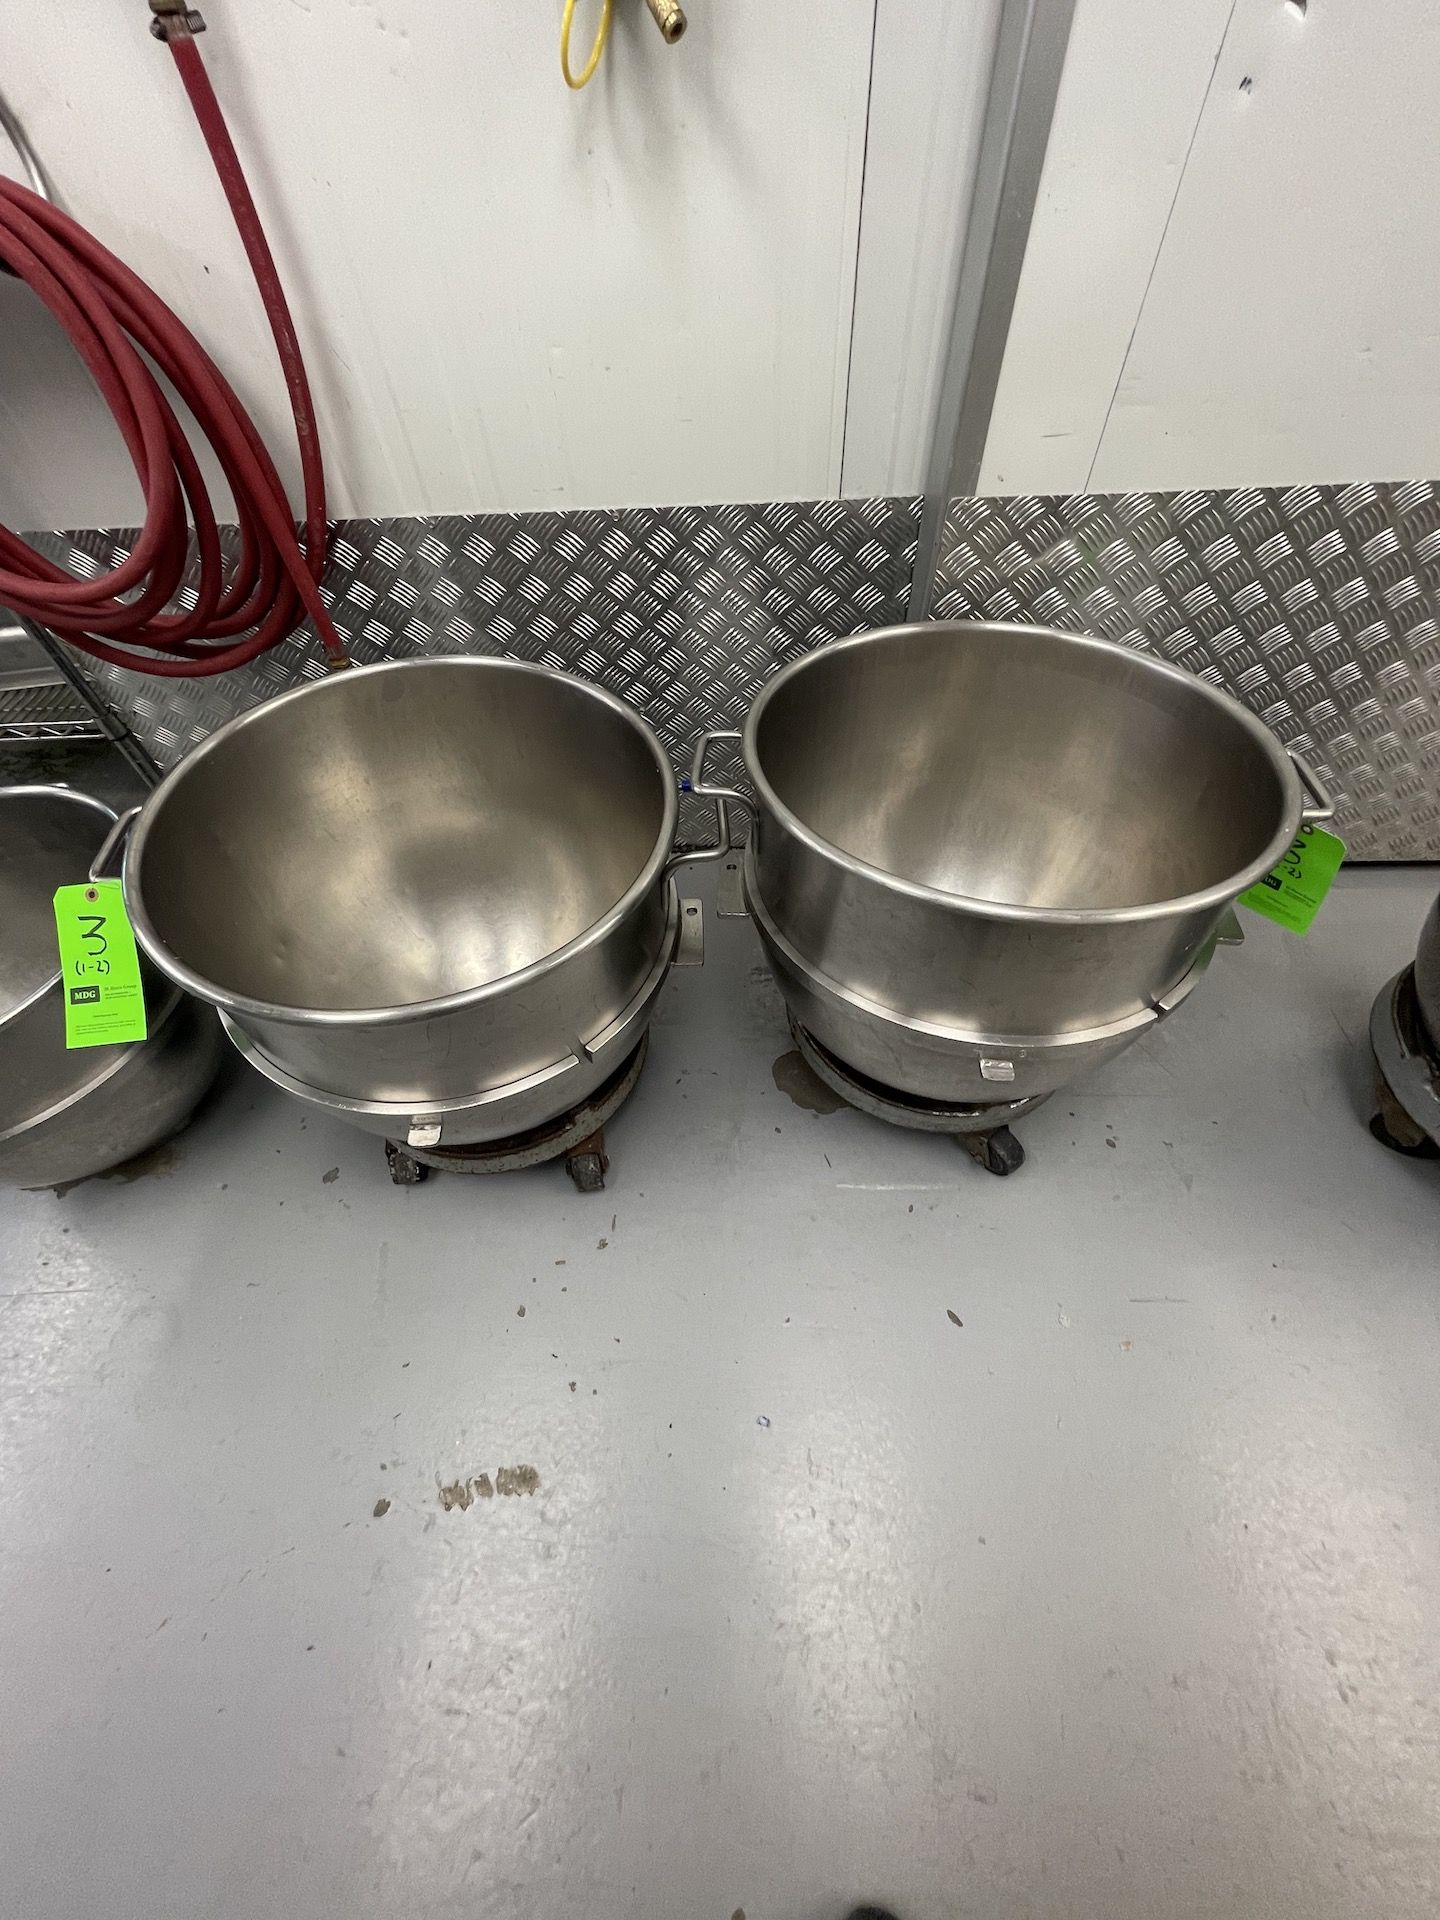 (2) HOBART MIXING BOWLS WITH PORTABLE BASES, APPROX. 20" DIA